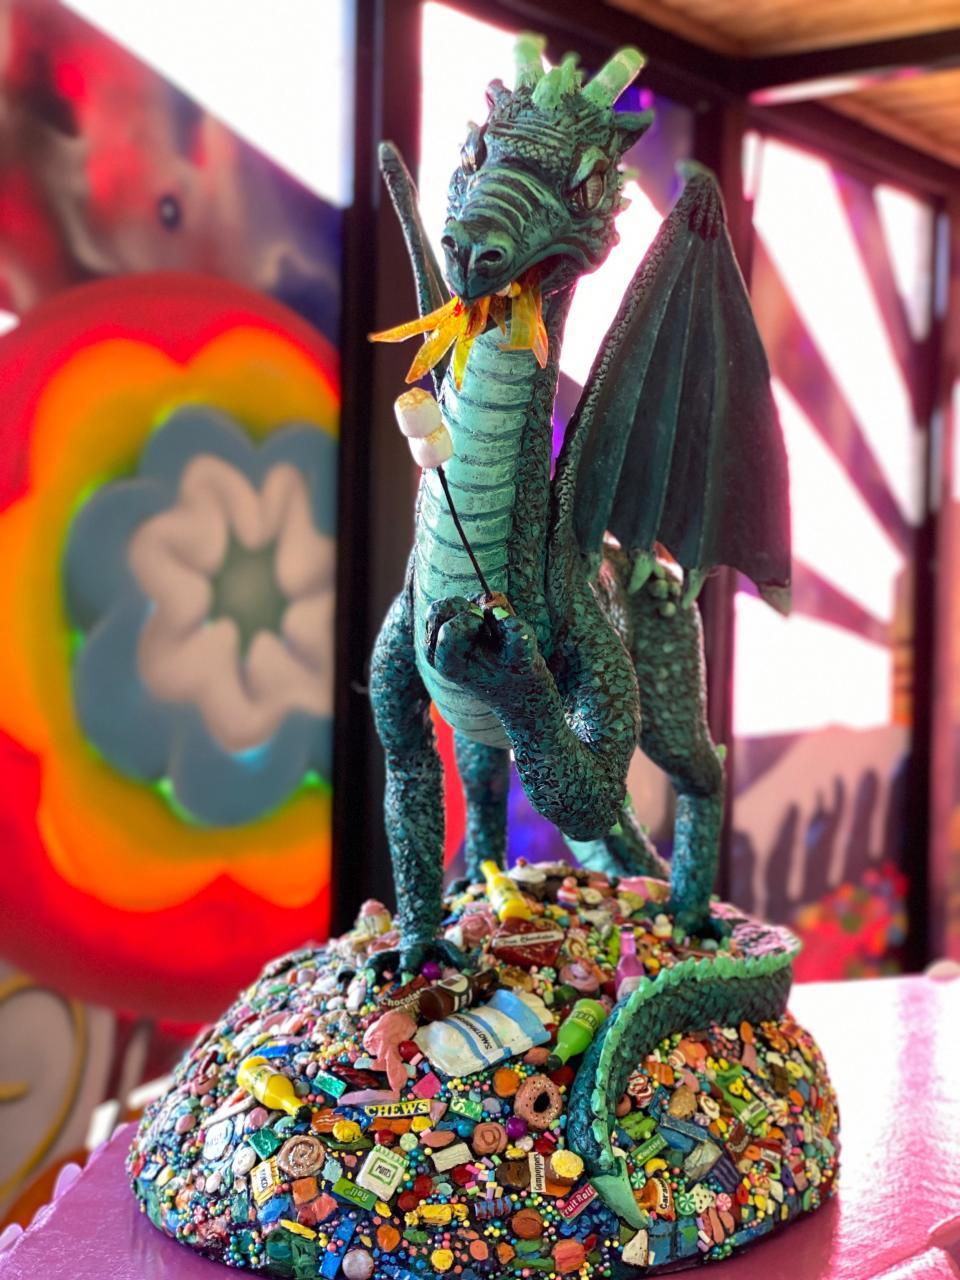 Enid artist Lori Hill crafted a candy-hoarding dragon named "Sugaryen" out of polymer clay on a wire armature. The sculpture is included in the immersive art experience "Sugar High," open in Enid through May 8.